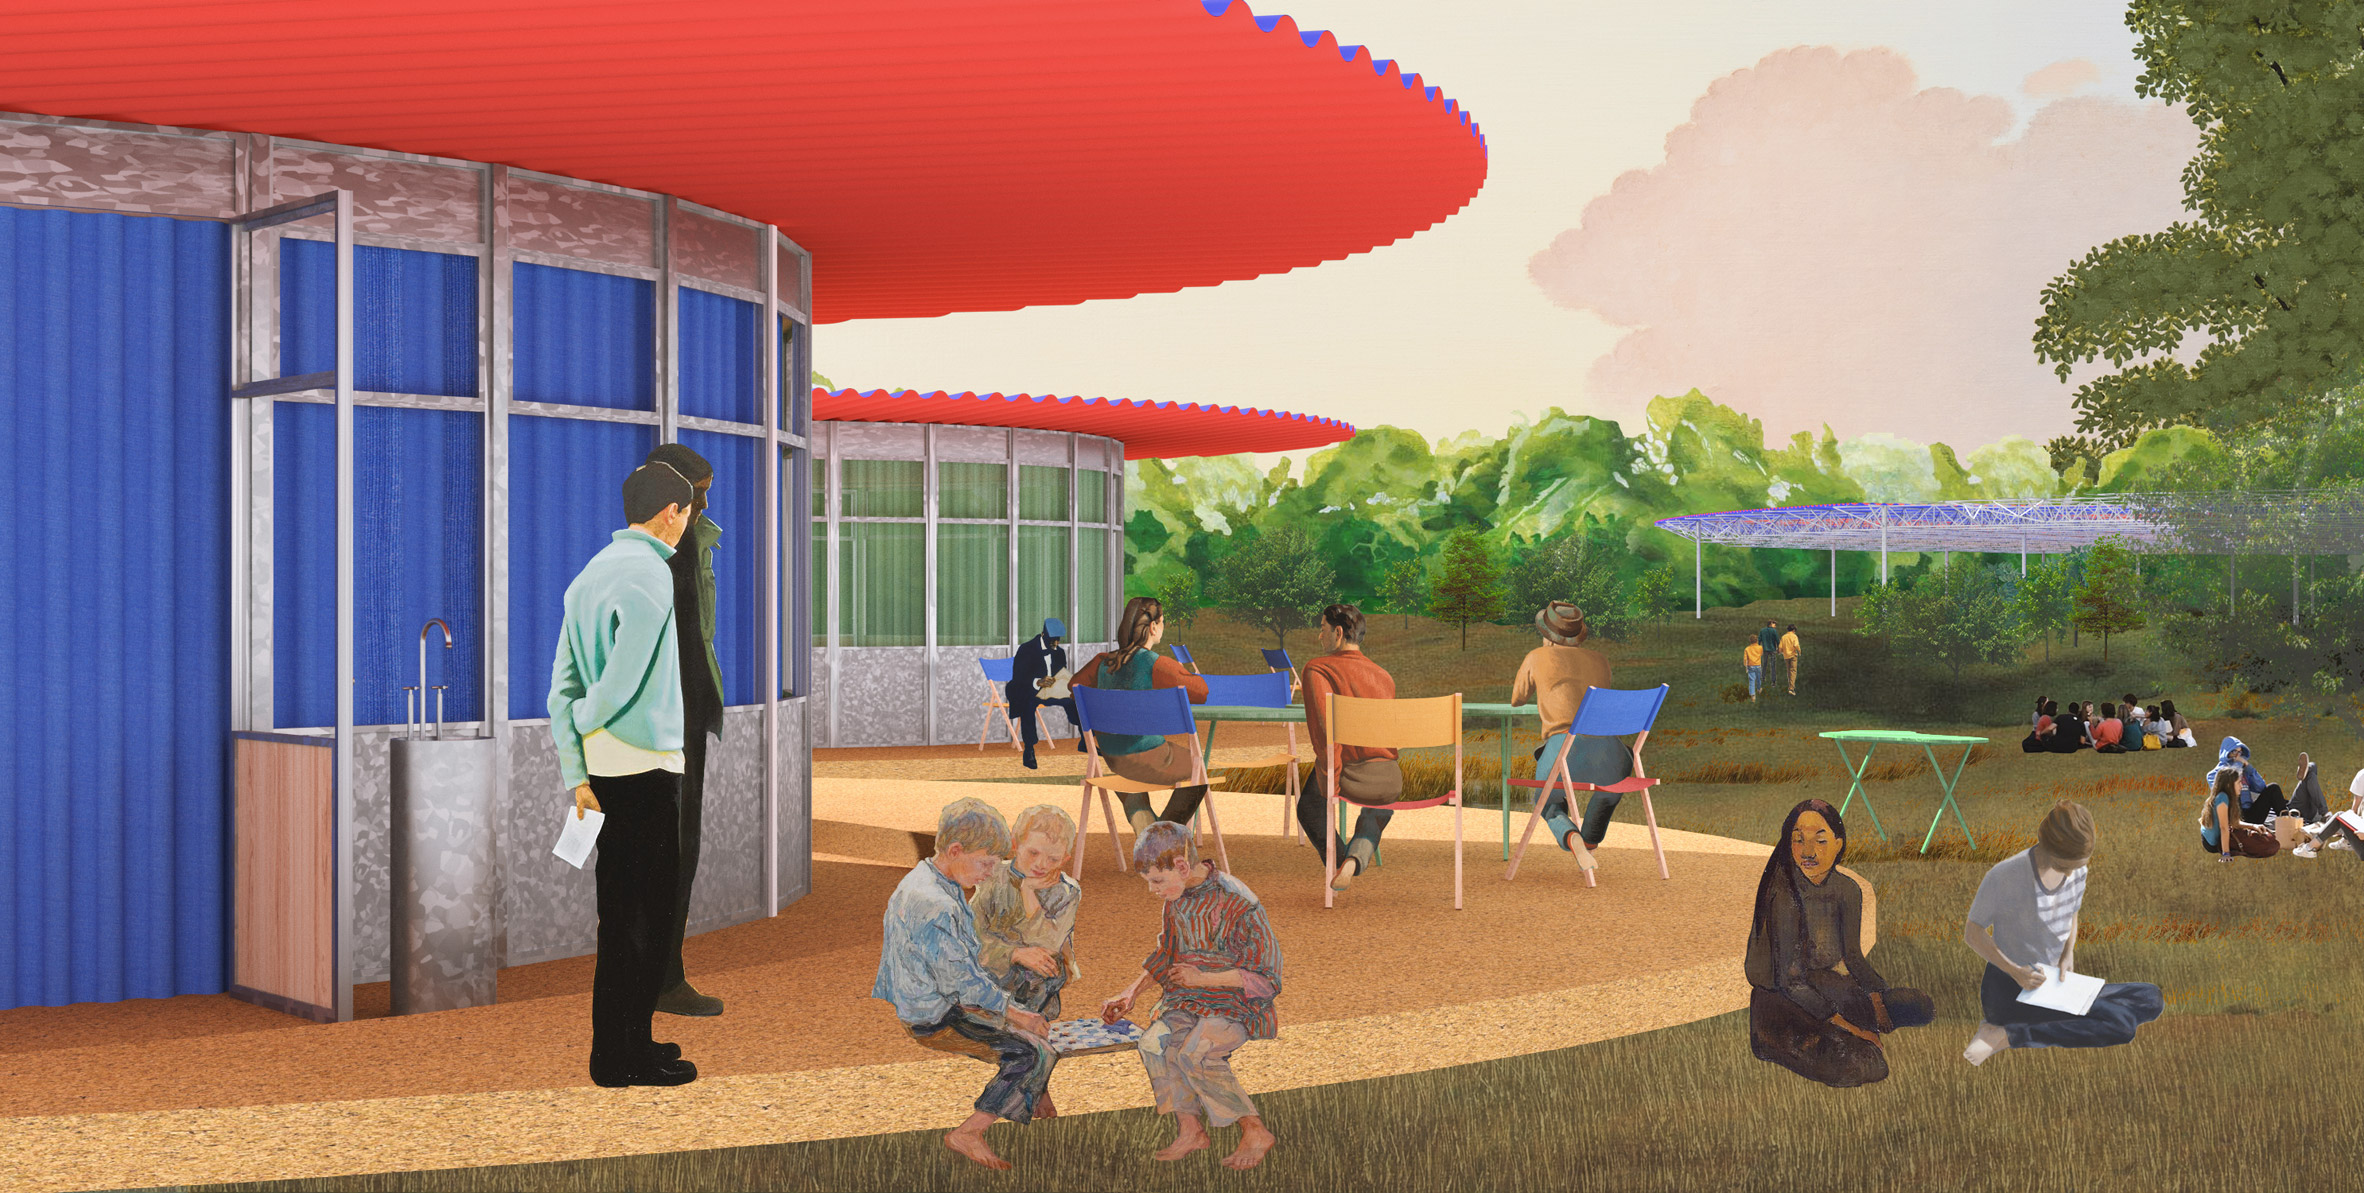 A colourful visualisation of educational pavilions where children can learn